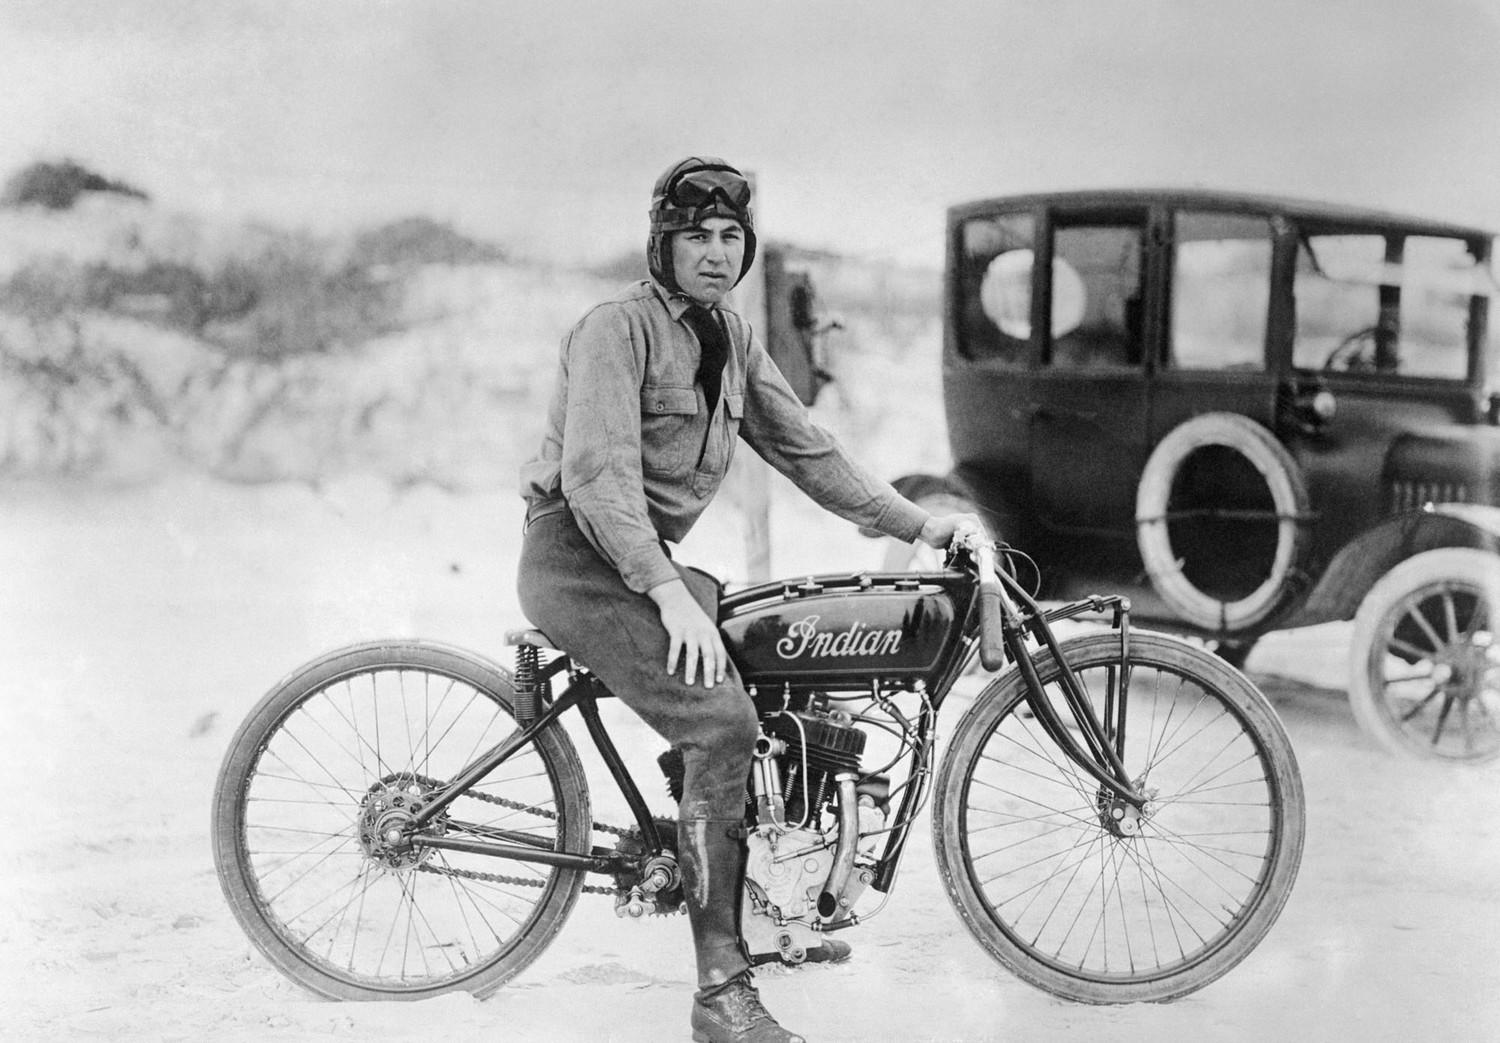 Herbert McBride broke the world's motorcycle record for amateurs with a speed of 104.4 miles per hour. McBride, along with his teammate in April 1920.jpg